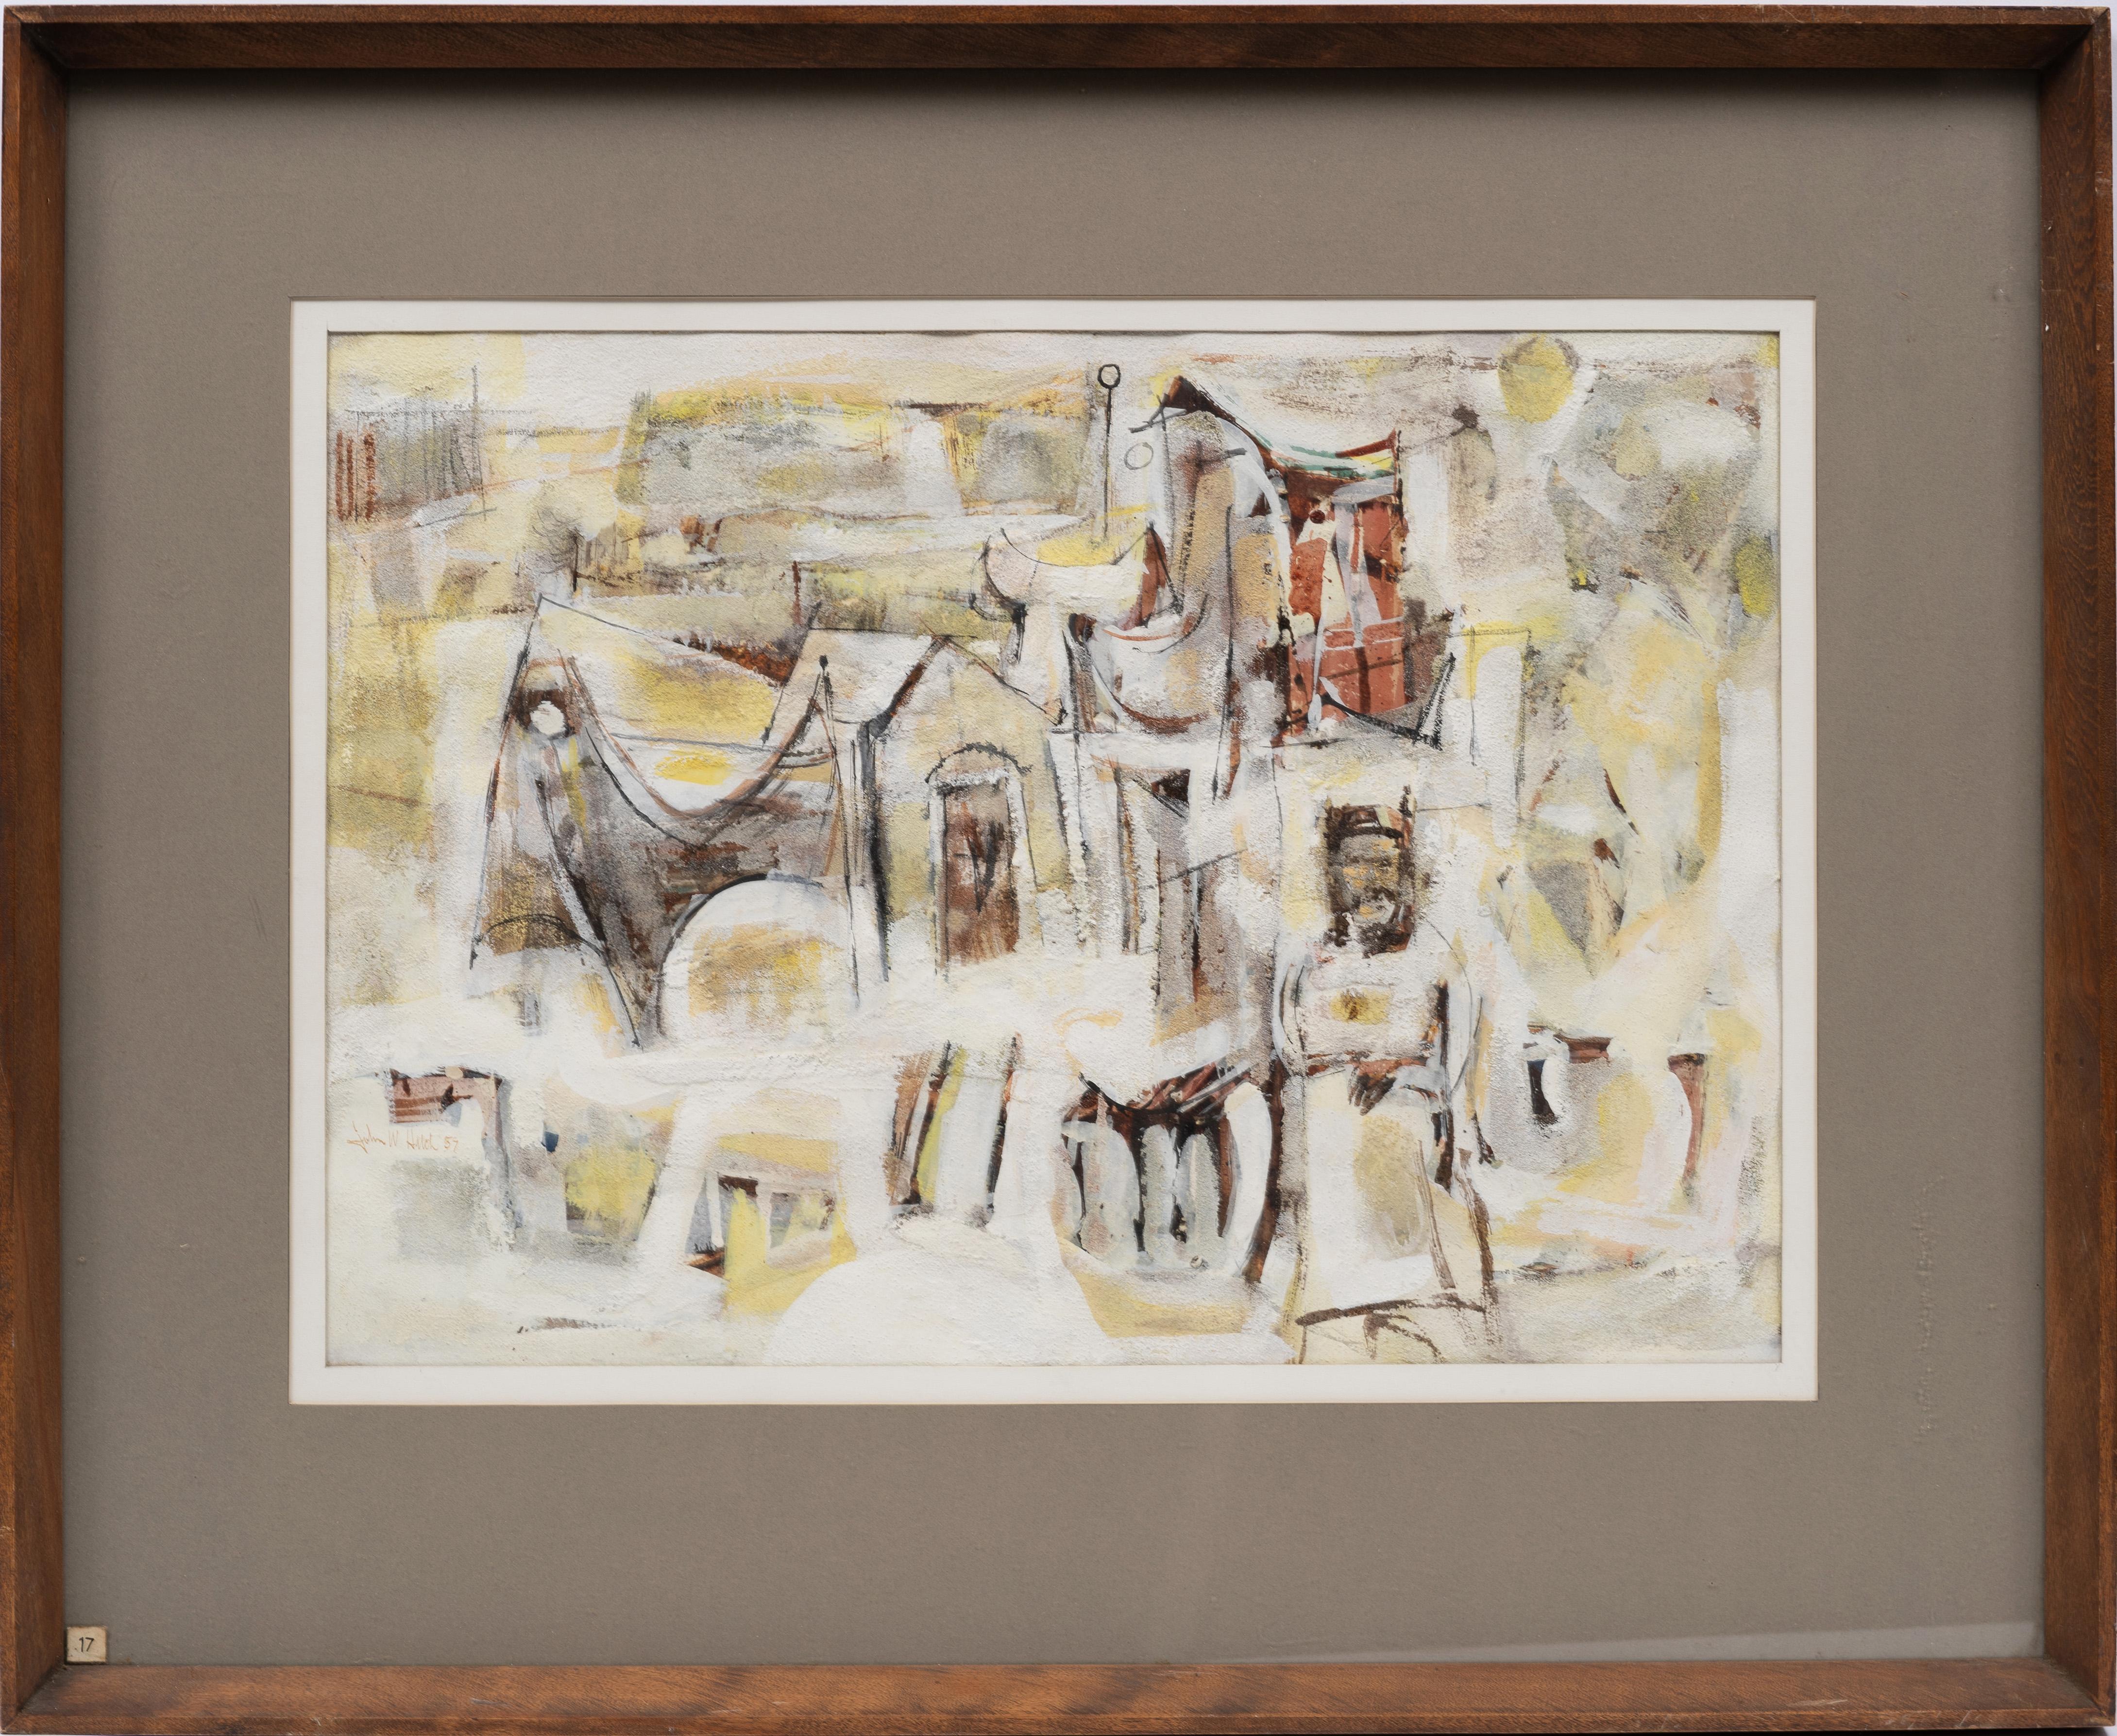 Vintage abstract composition by John W. Hatch (1919 - 1998, American).  Exhibited work with a tag lower left.  Gouache and watercolor on paper.  Signed.  Framed.